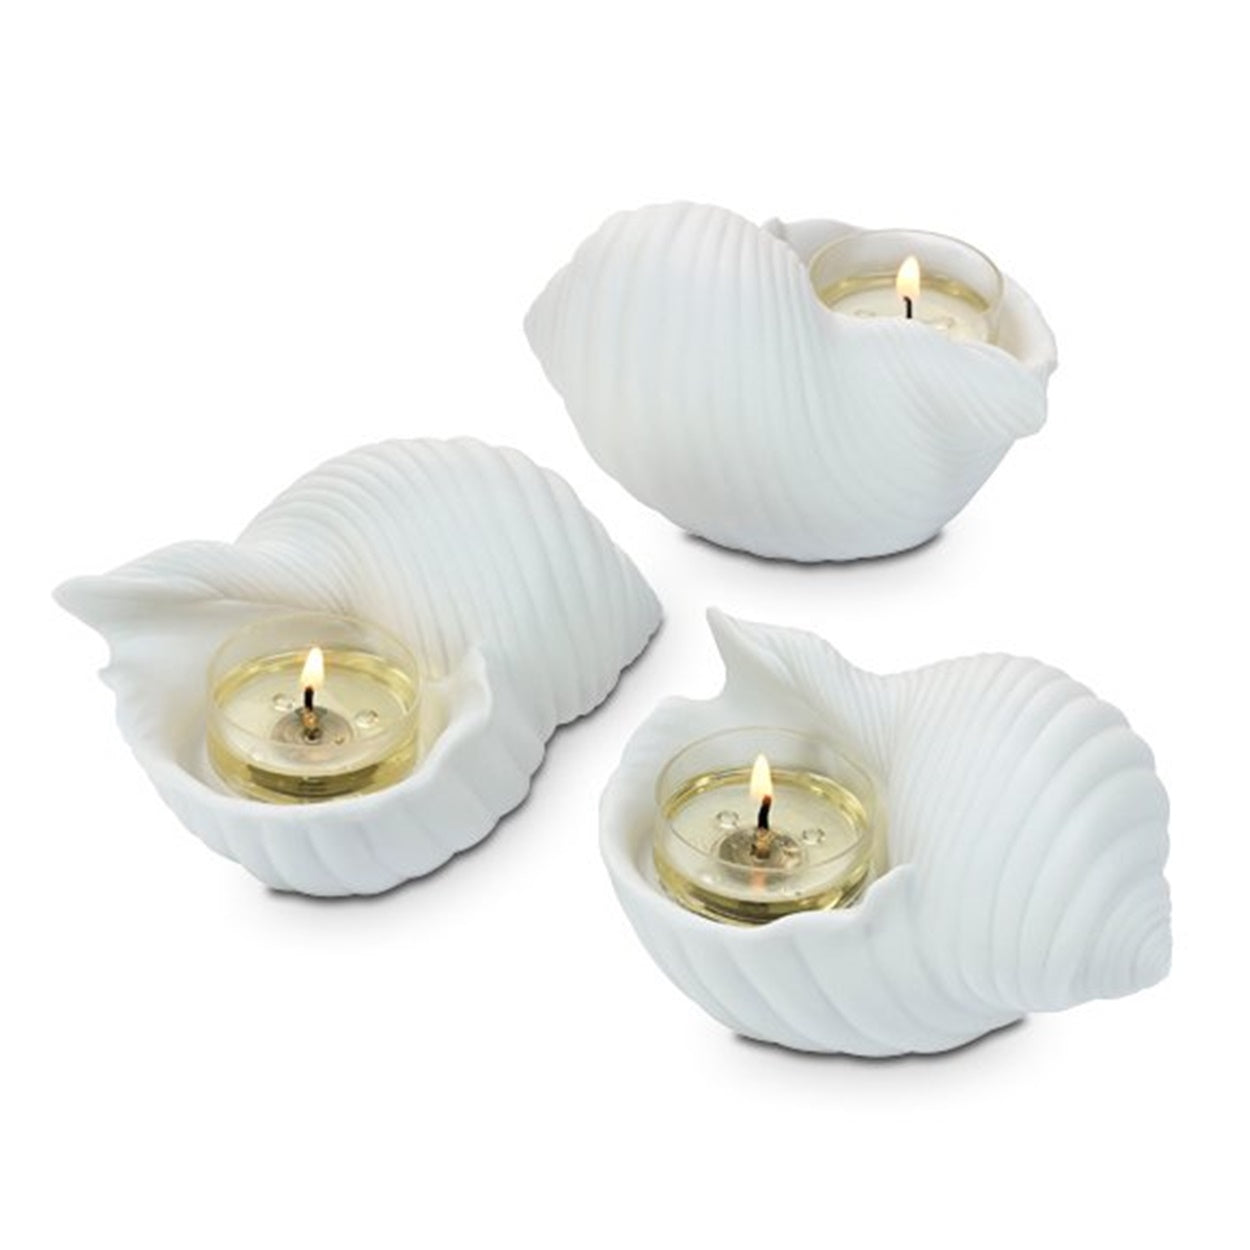 PartyLite CONCH SEA SHELL CERAMIC POTTERY TEALIGHT TRIO 3 CANDLE HOLDERS NIB - Plastic Glass and Wax